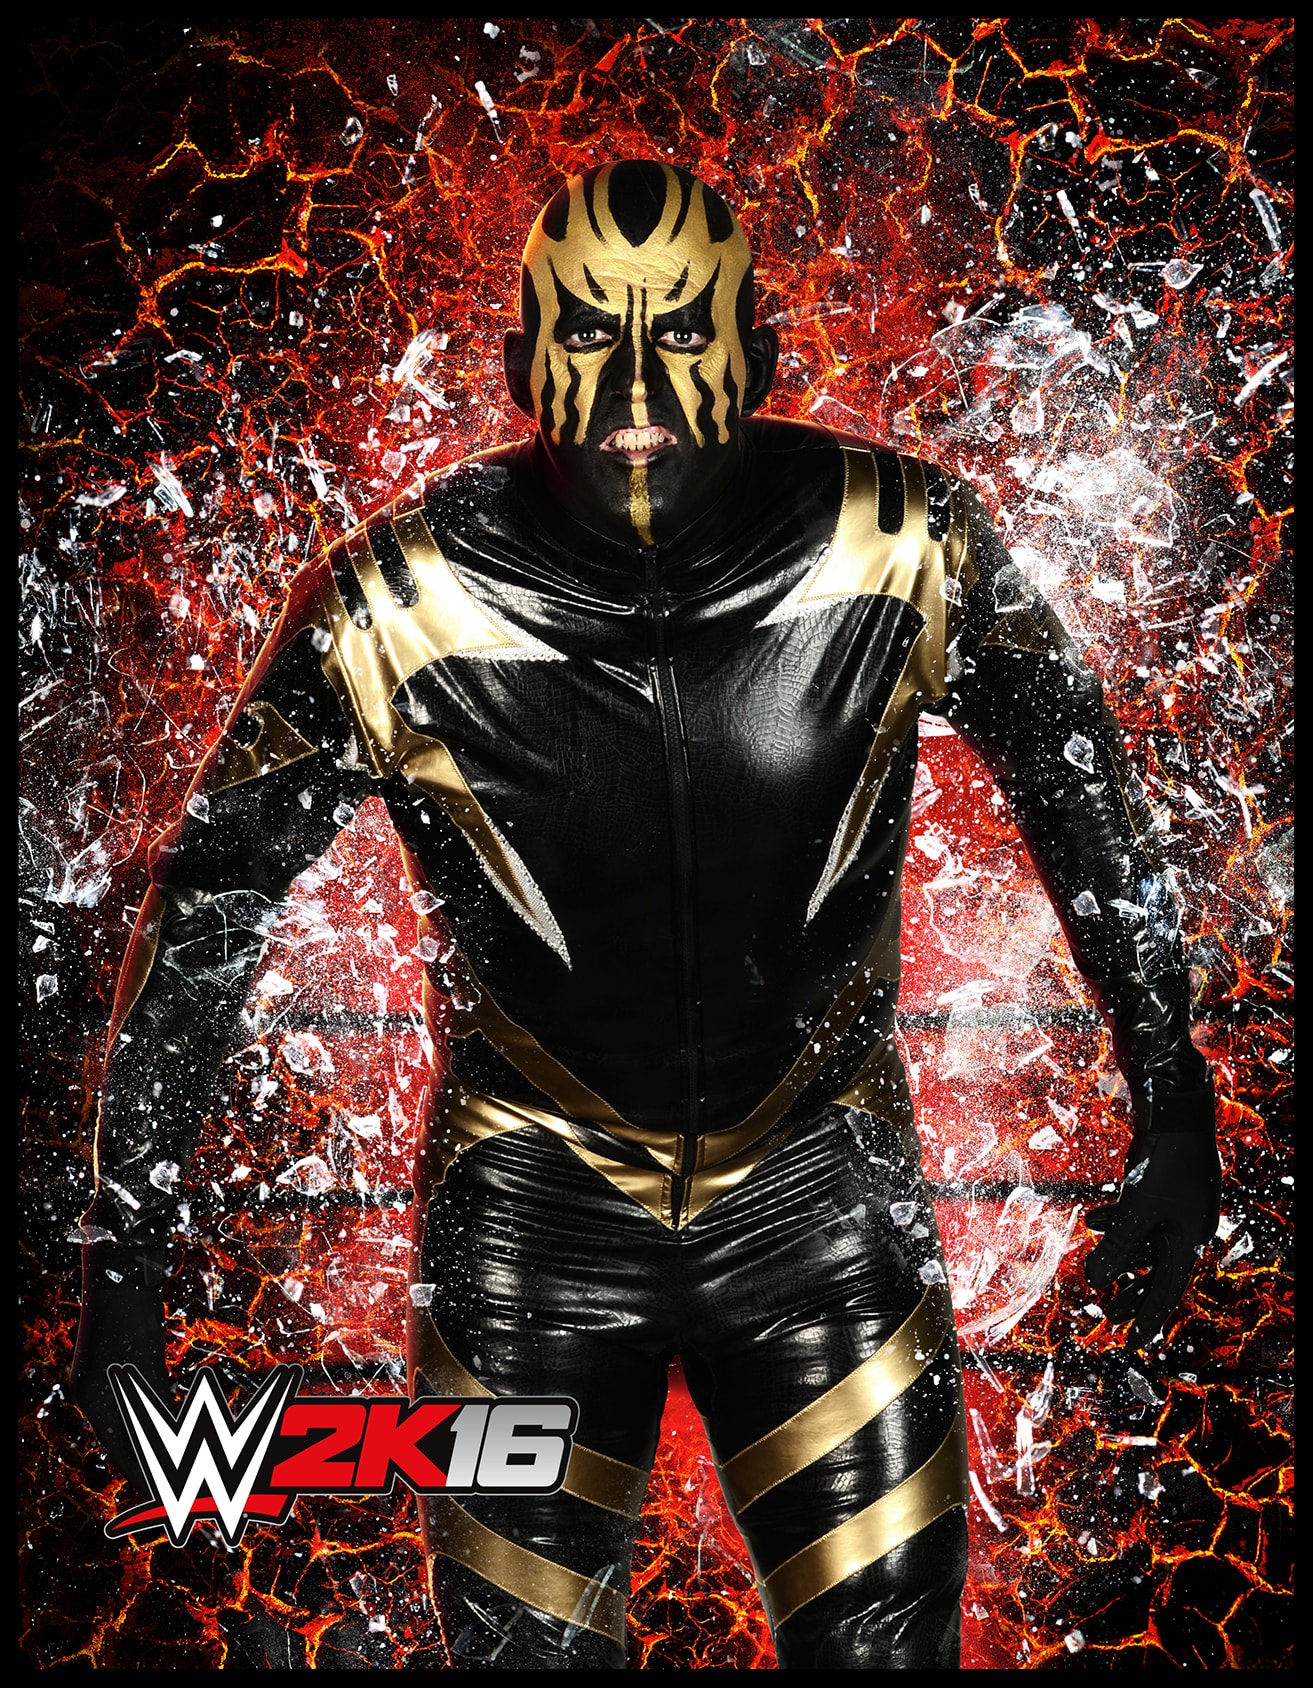 Wwe 2k16 Ign S Weekly Roster Reveal New Superstars Including